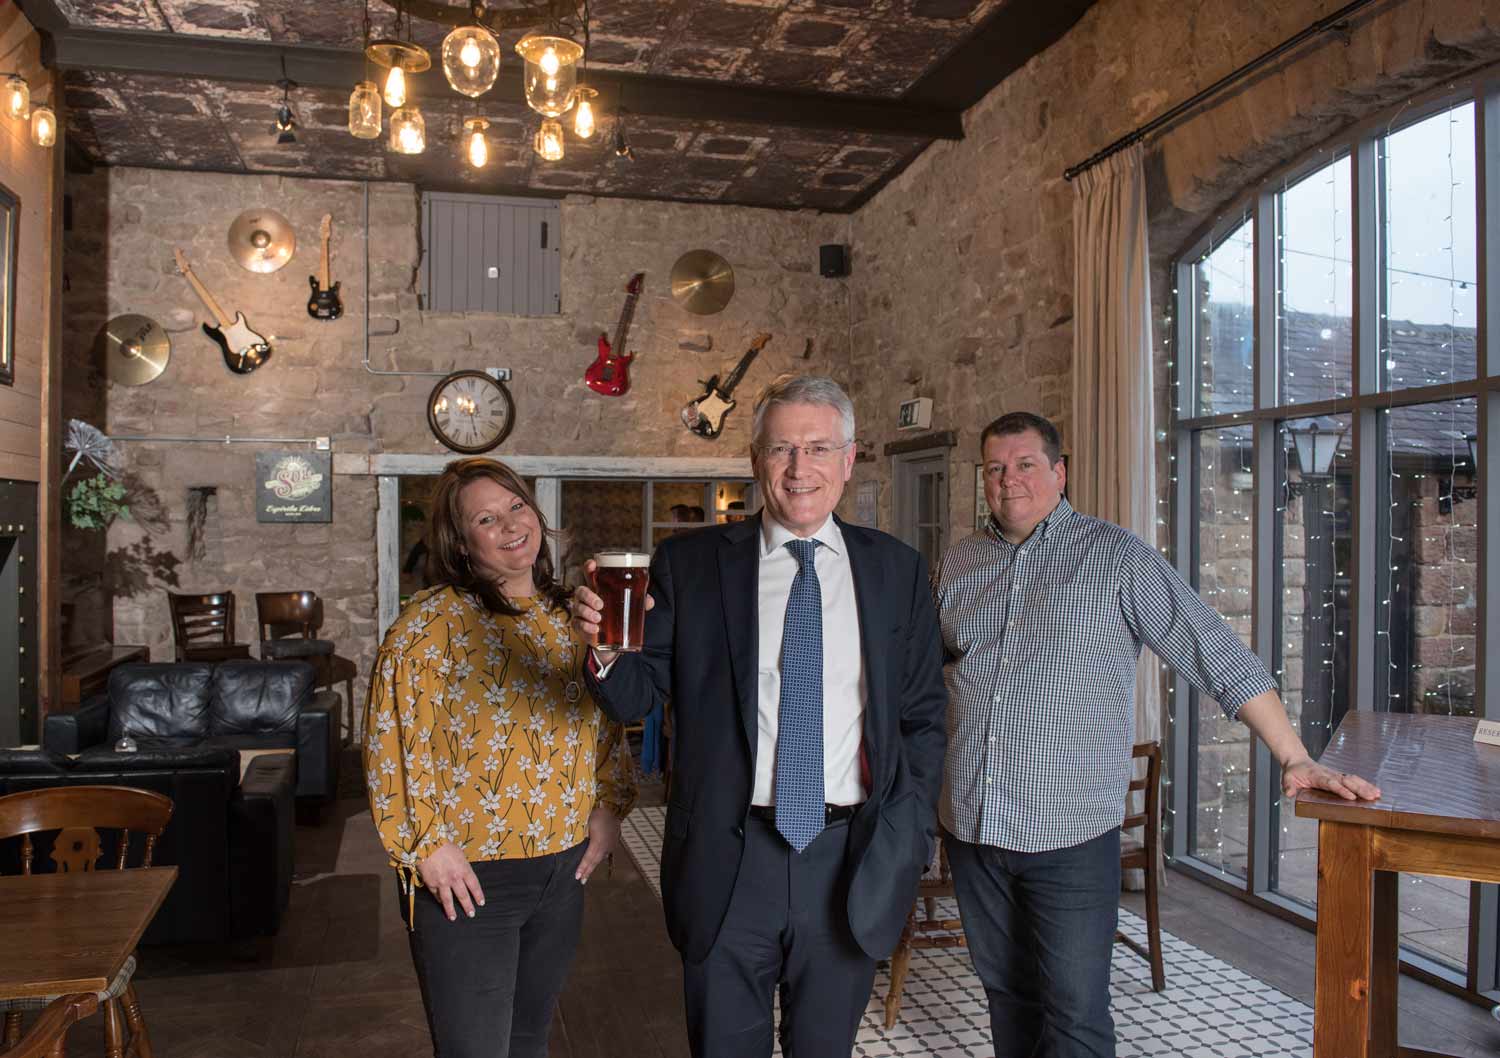 MP for Harrogate & Knaresborough, Andrew Jones, recently visited The Knox in Bilton, Harrogate. He was there to celebrate the success of licensees Simon and Katie Swannie